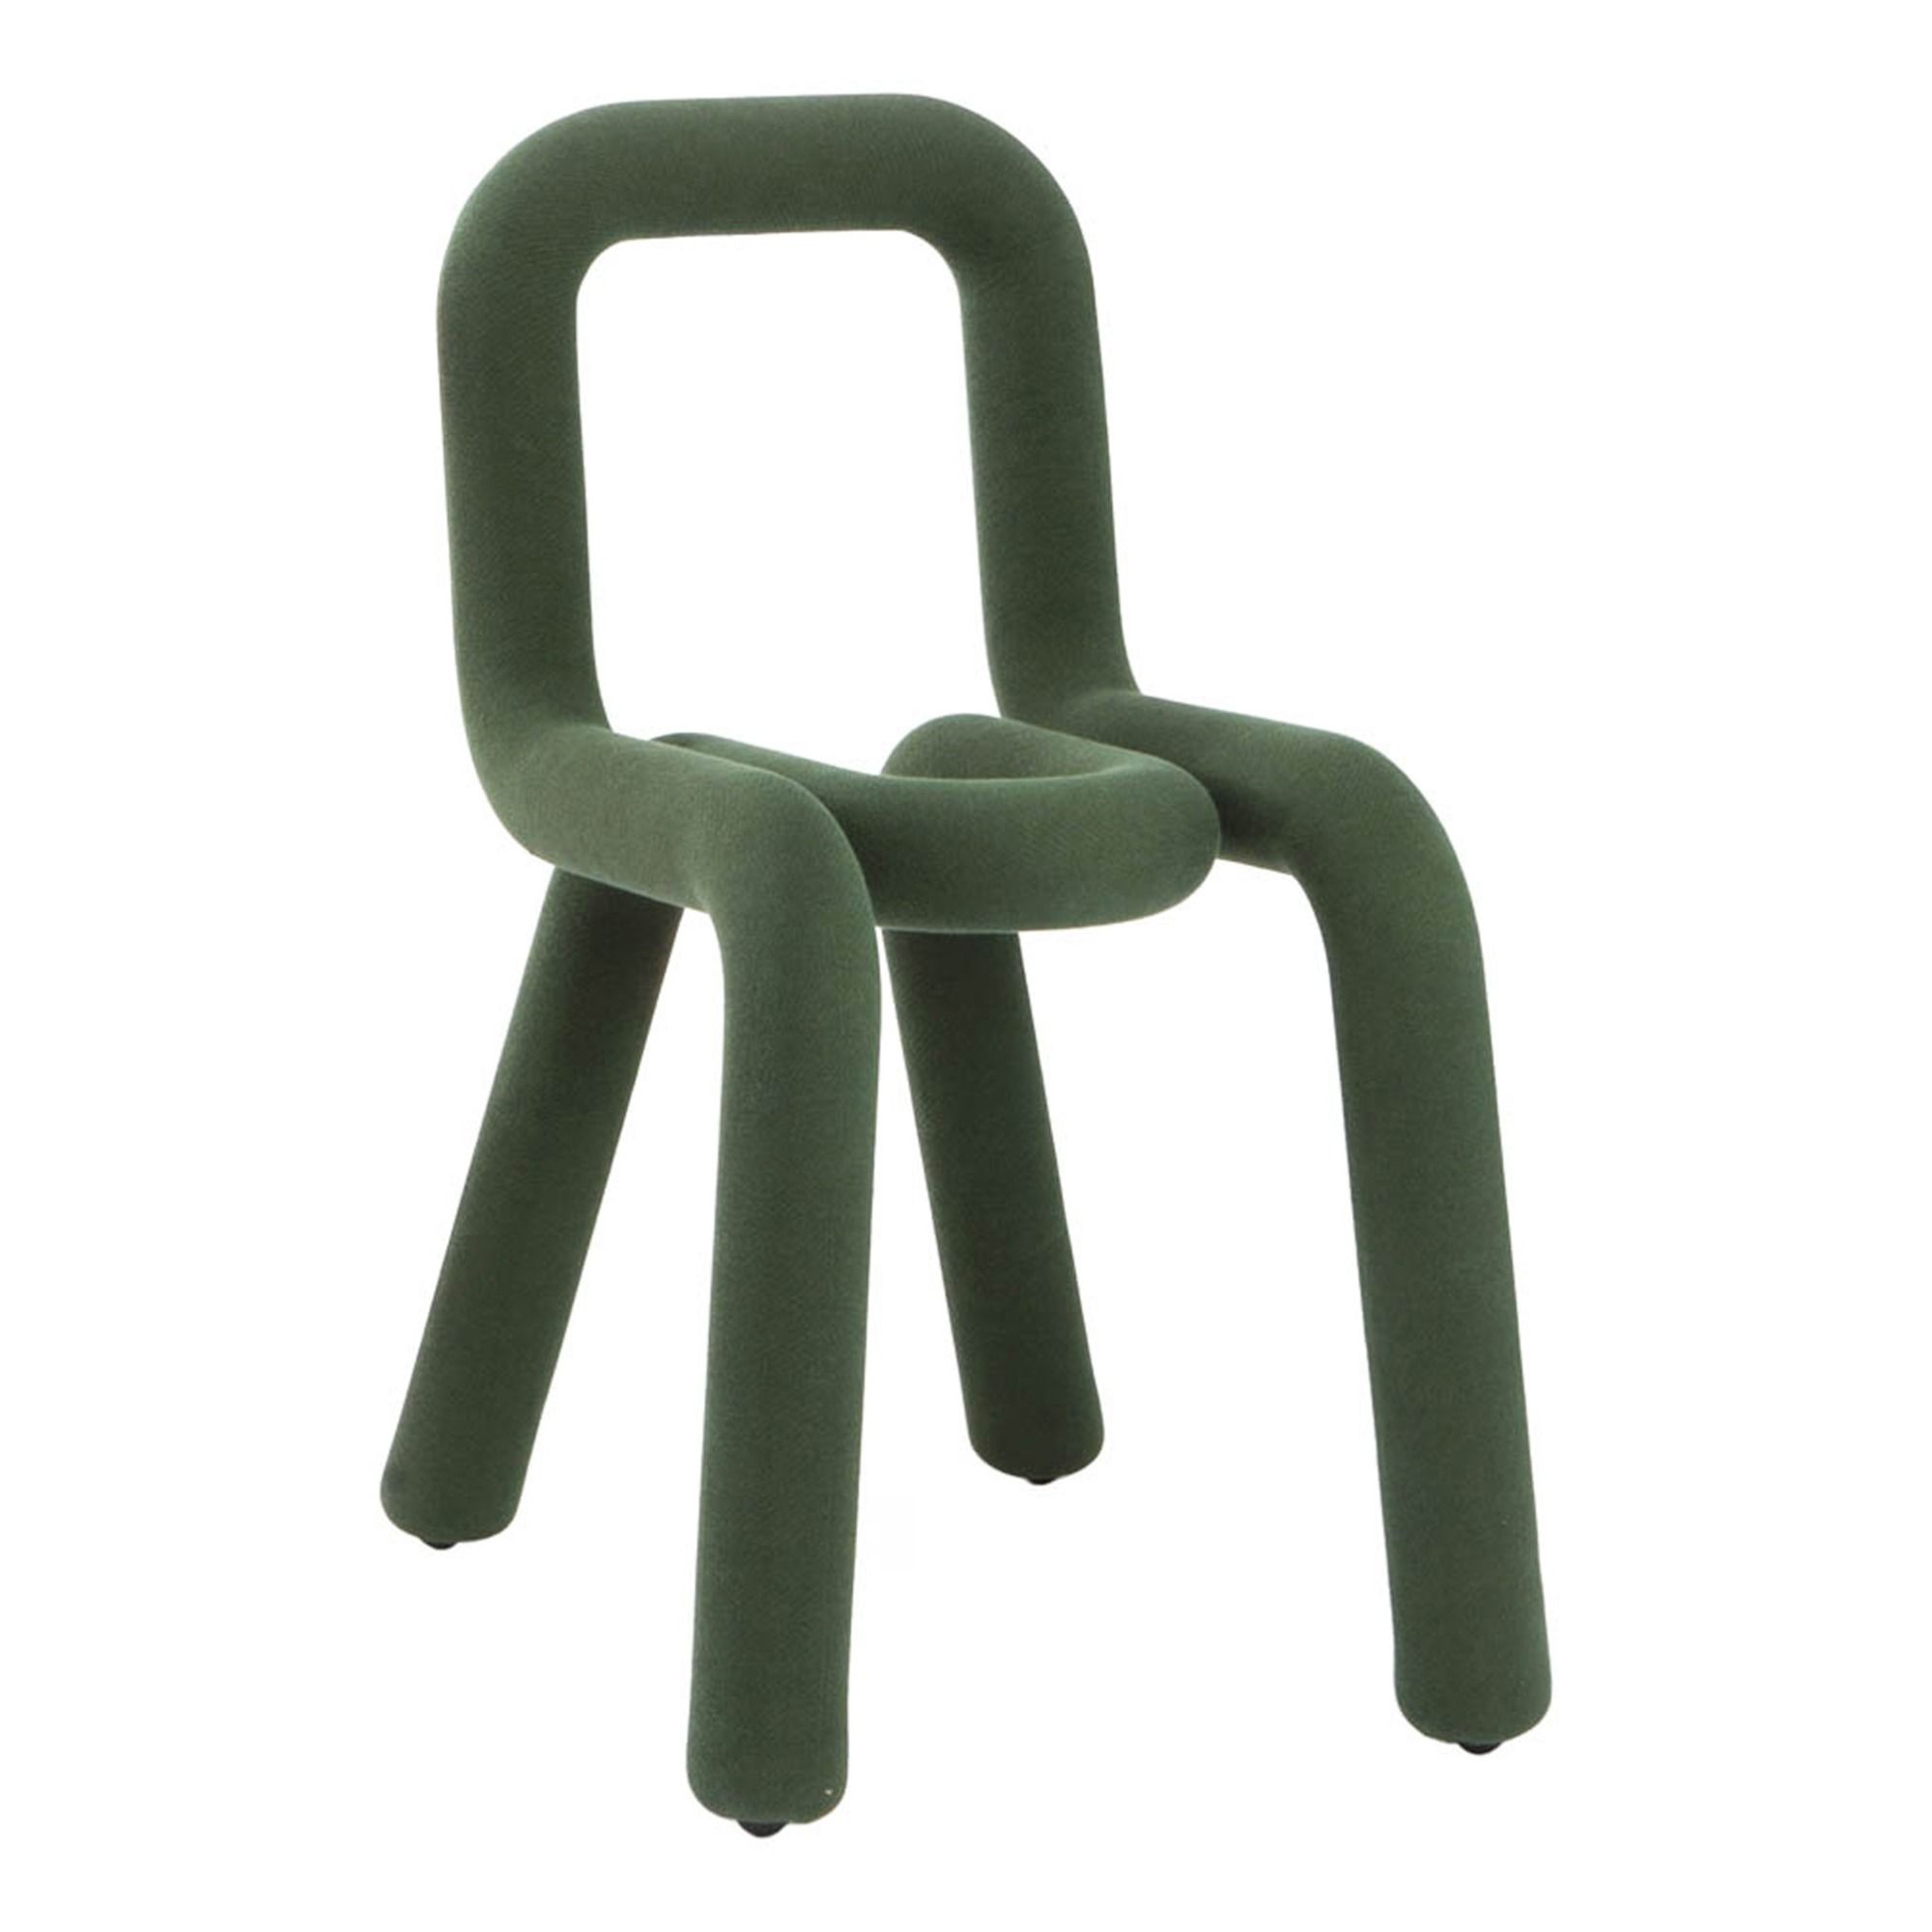 Big Game Bold Chair Green Moustache Design Adult